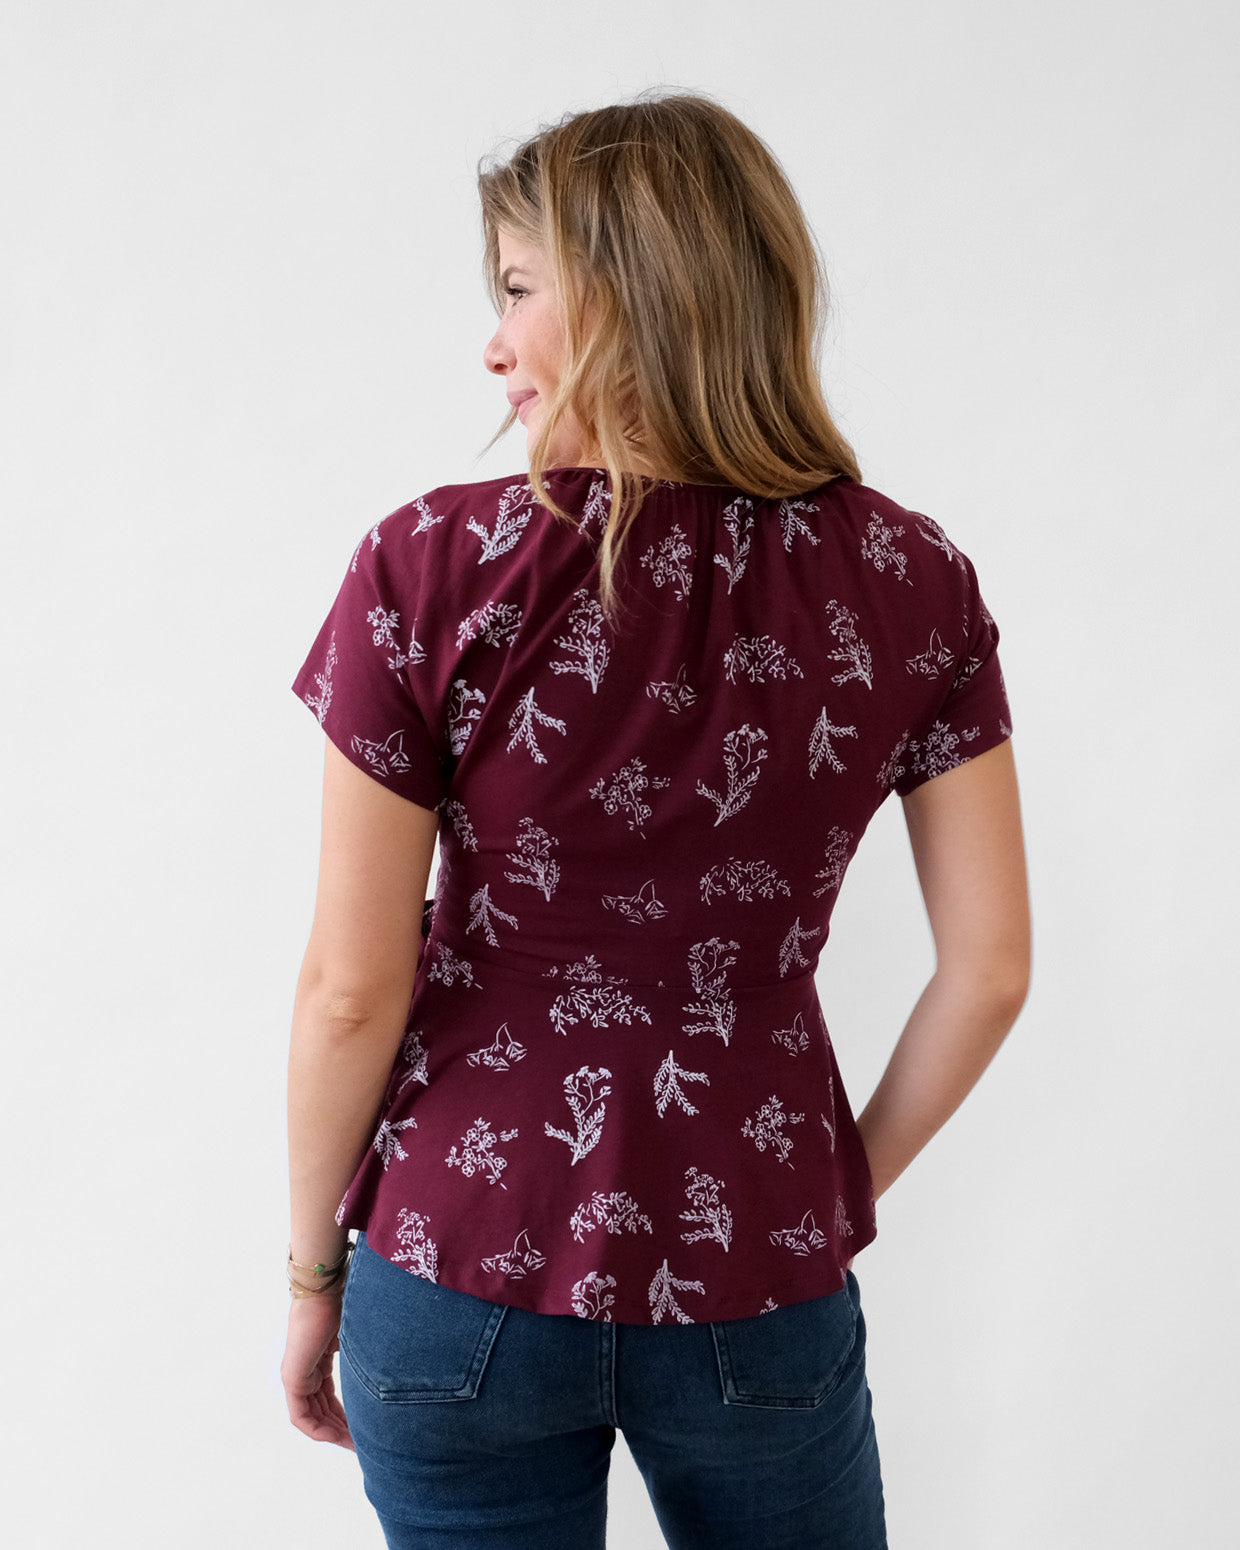 ZINNIA printed top in Currant/White